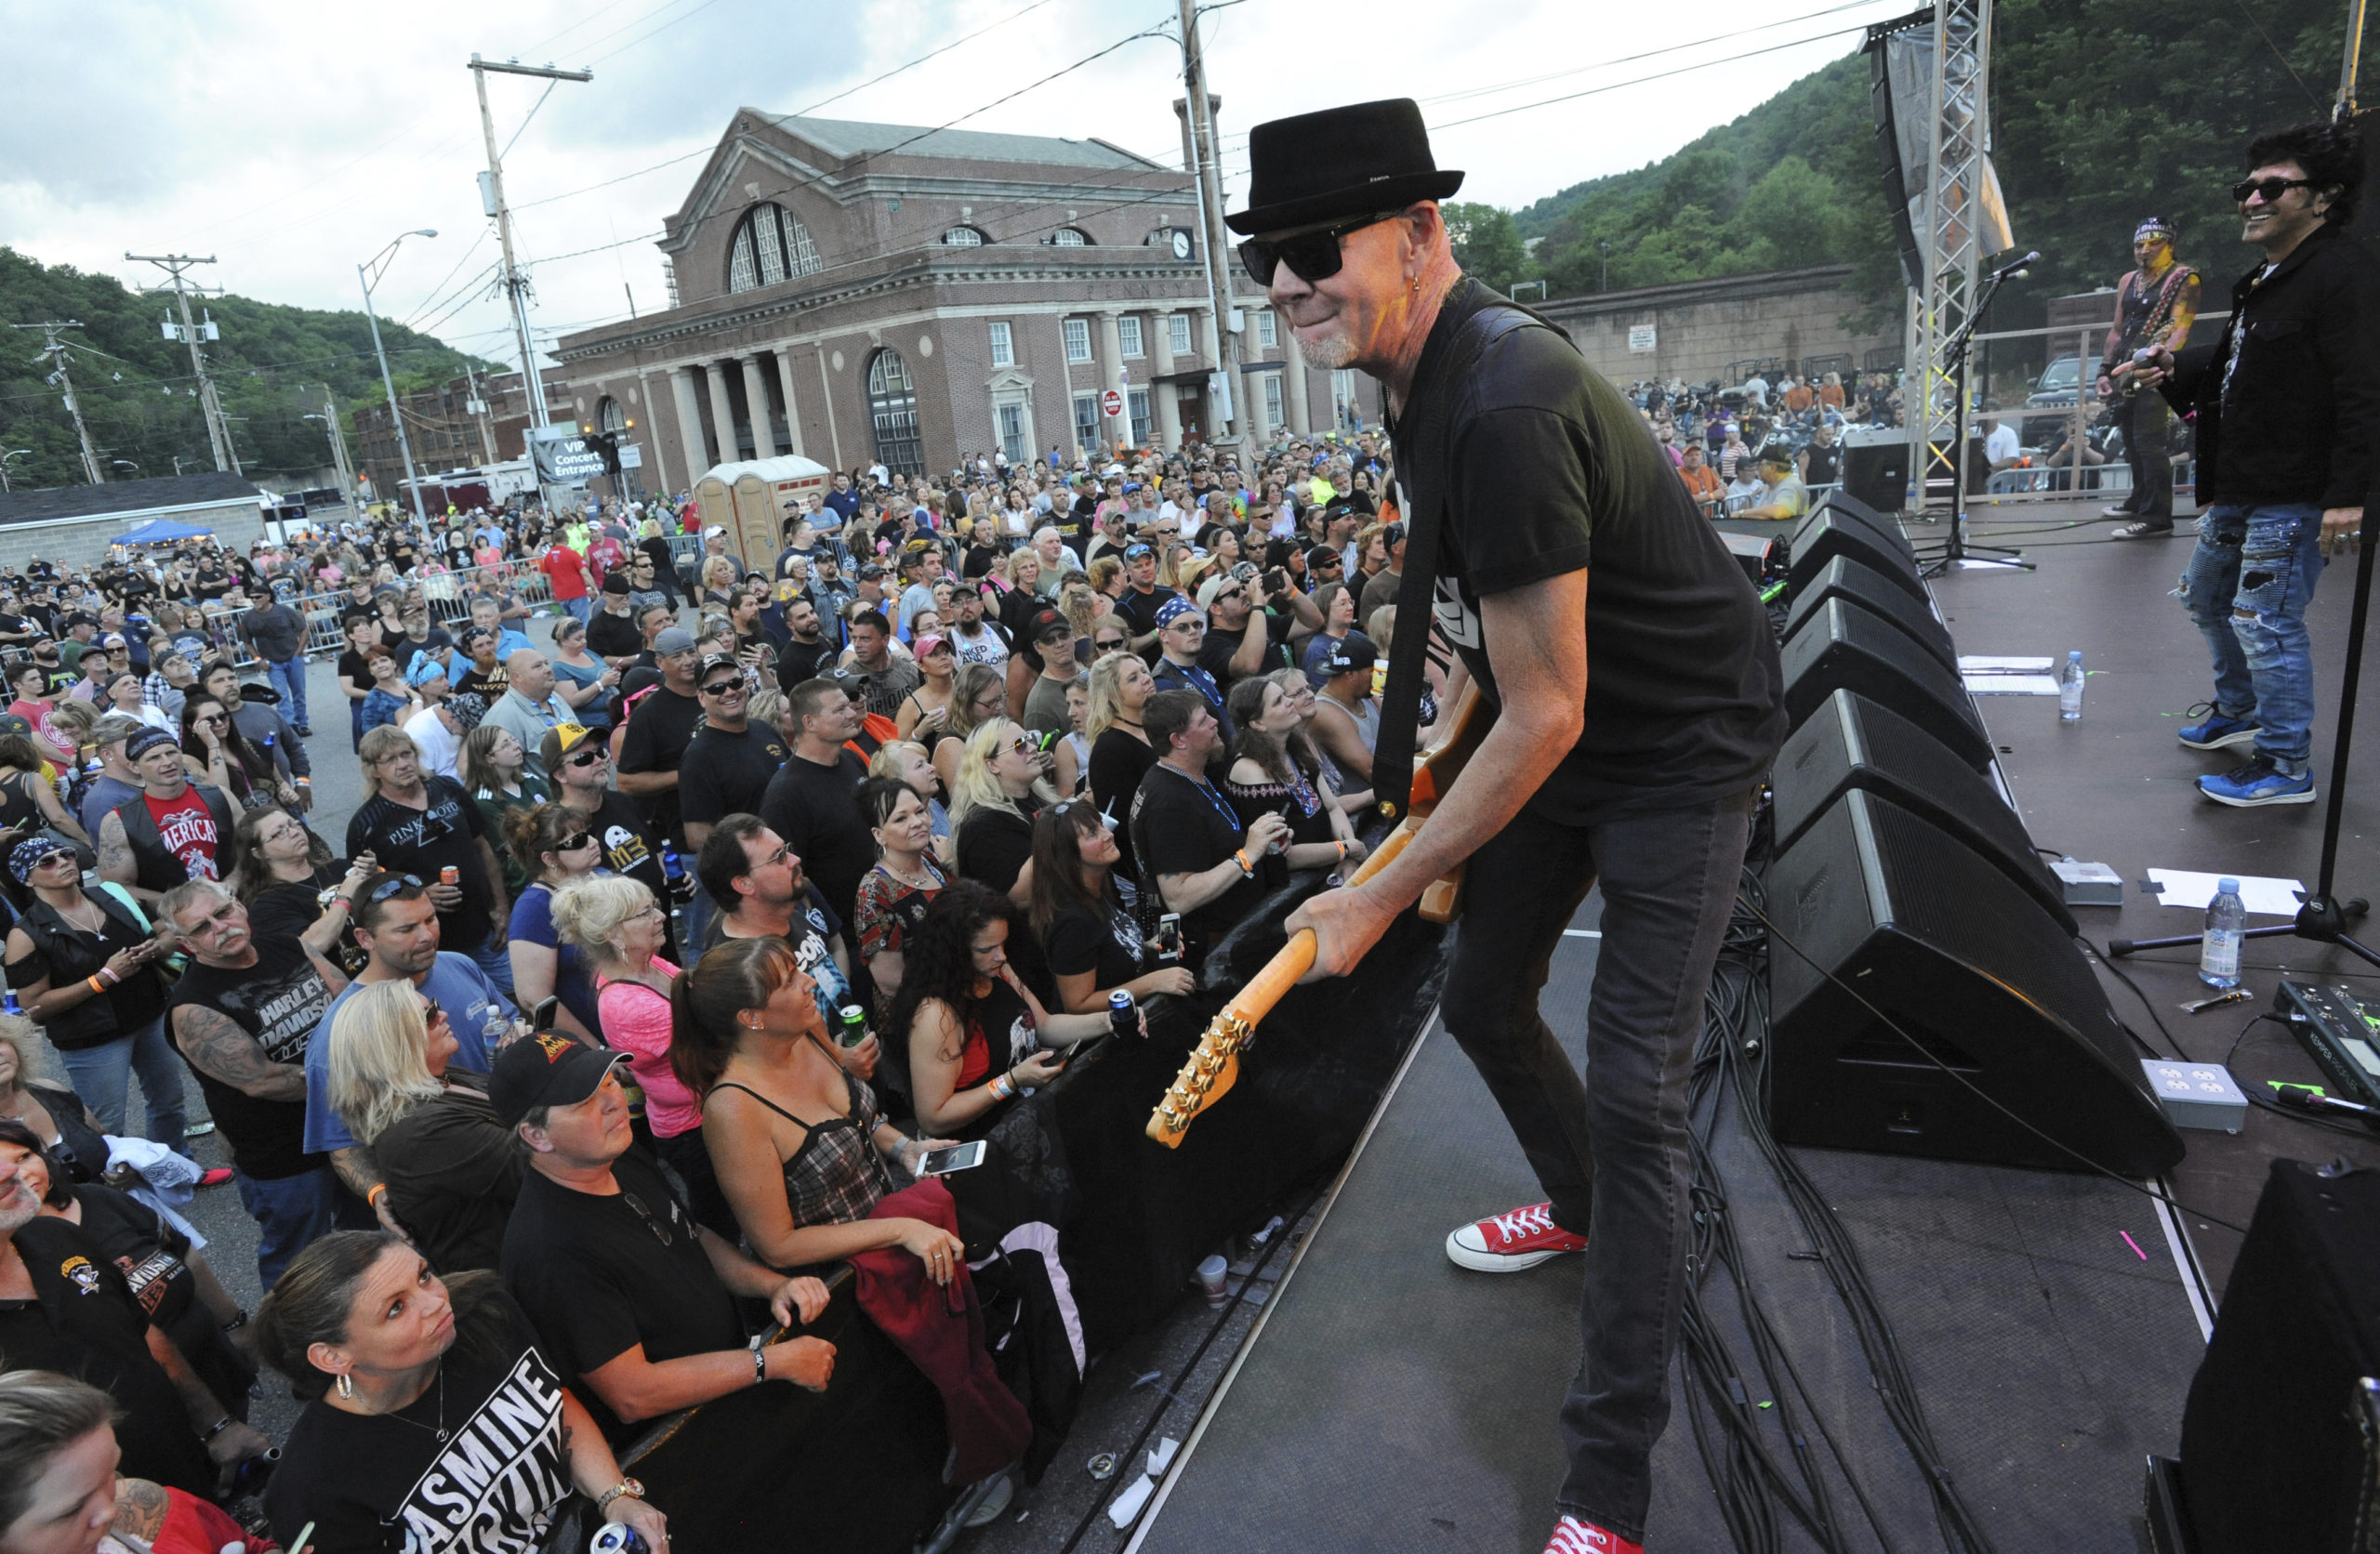 Mark Kendall, center, with the band Great White, performs in Johnstown, Pennsylvania, in June 2018. Great White, a metal band, has apologized for performing at an outdoor North Dakota concert where crowd members did not wear face masks amid the coronavirus pandemic.